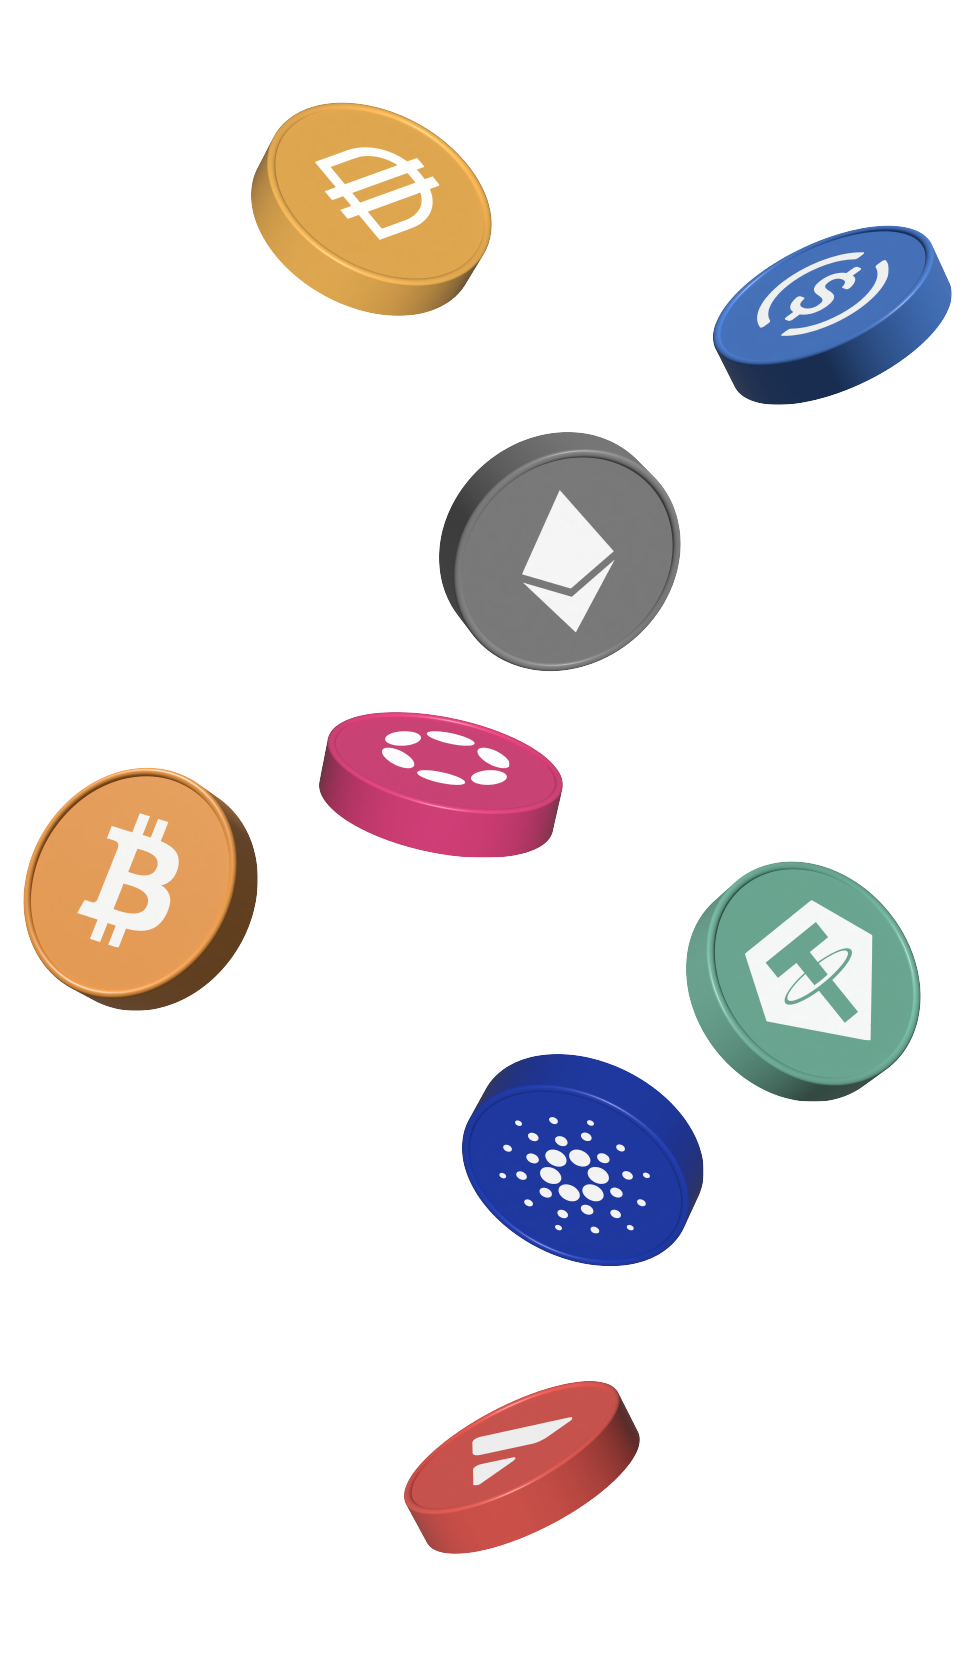 Image of desktop display showing cryptocurrencies for investment.